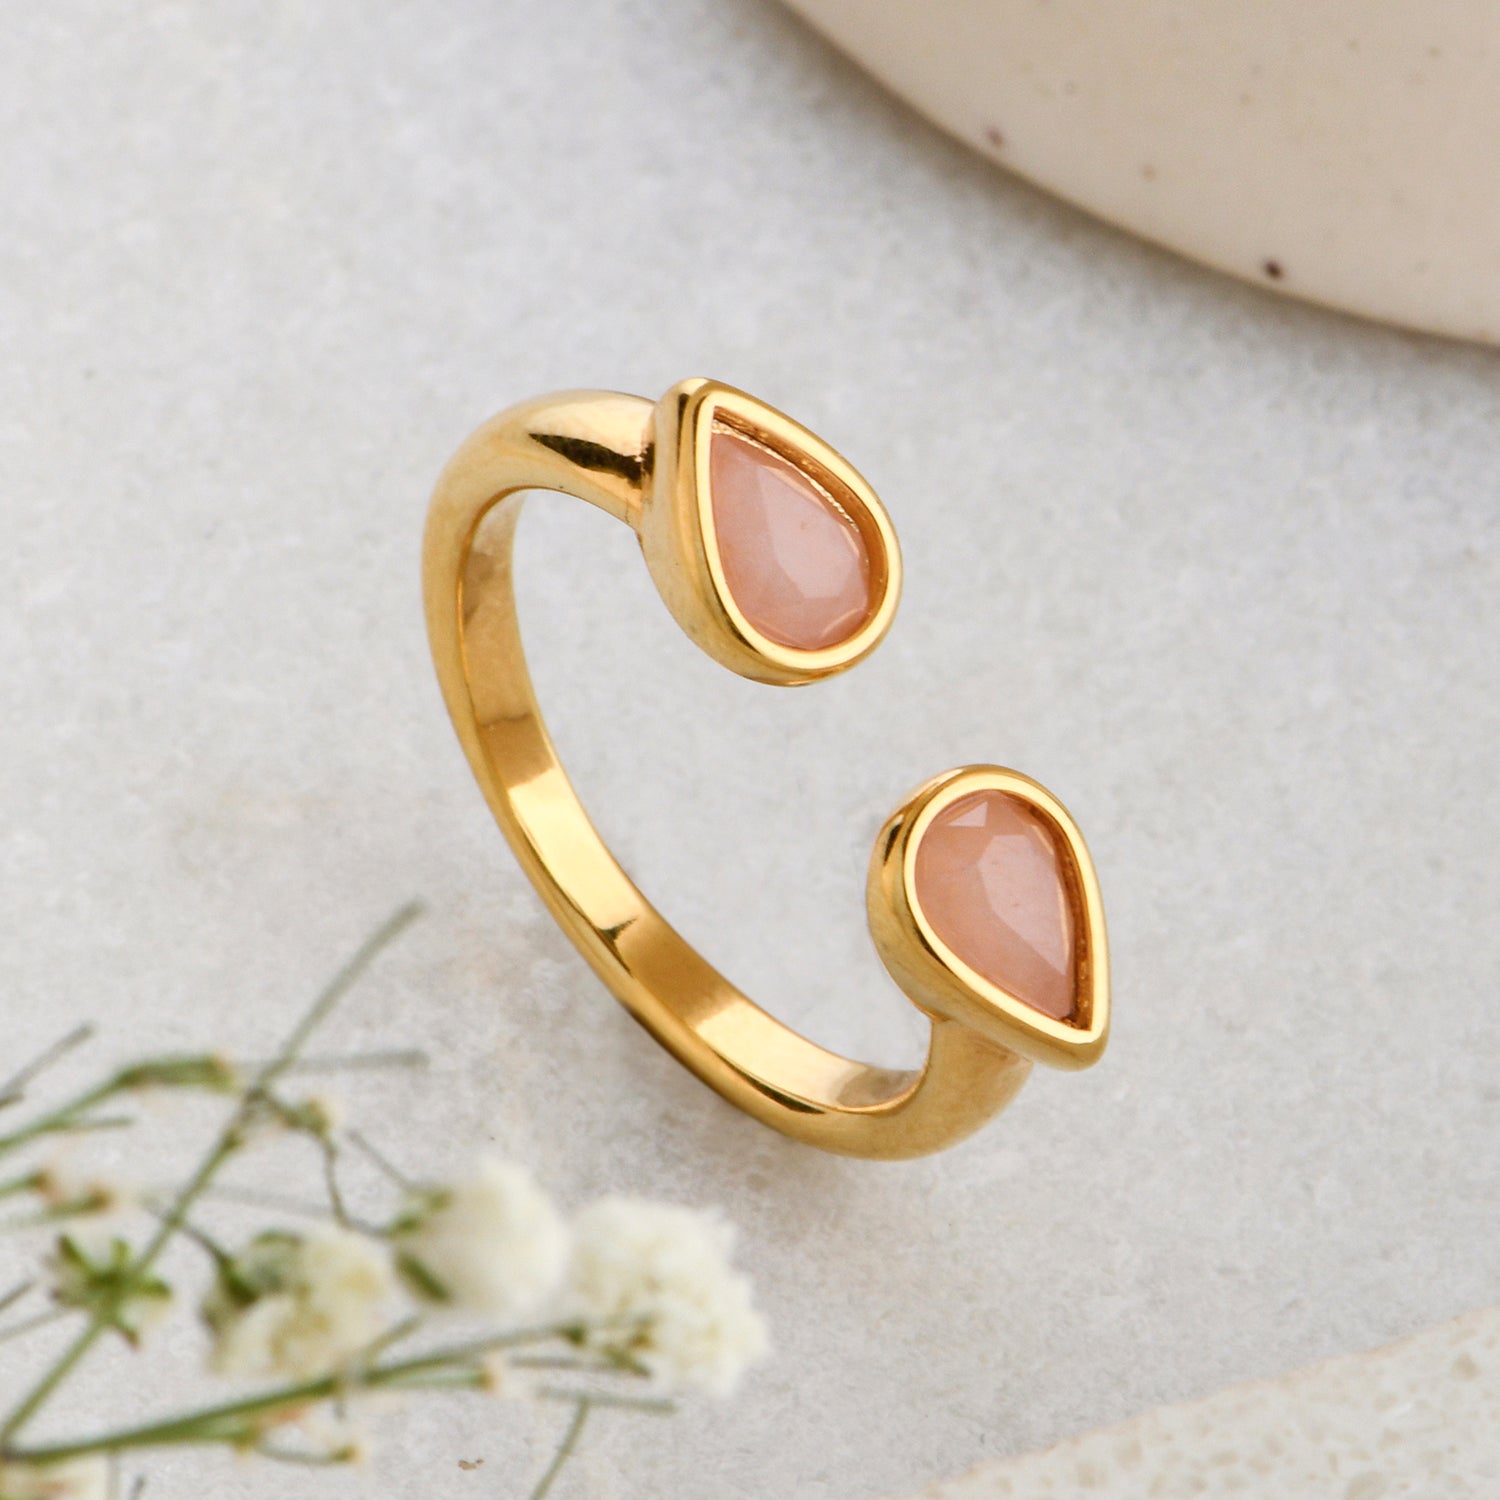 Real Gold Plated Circle Healing Stone Ring Rose Quartz For Women By Accessorize London